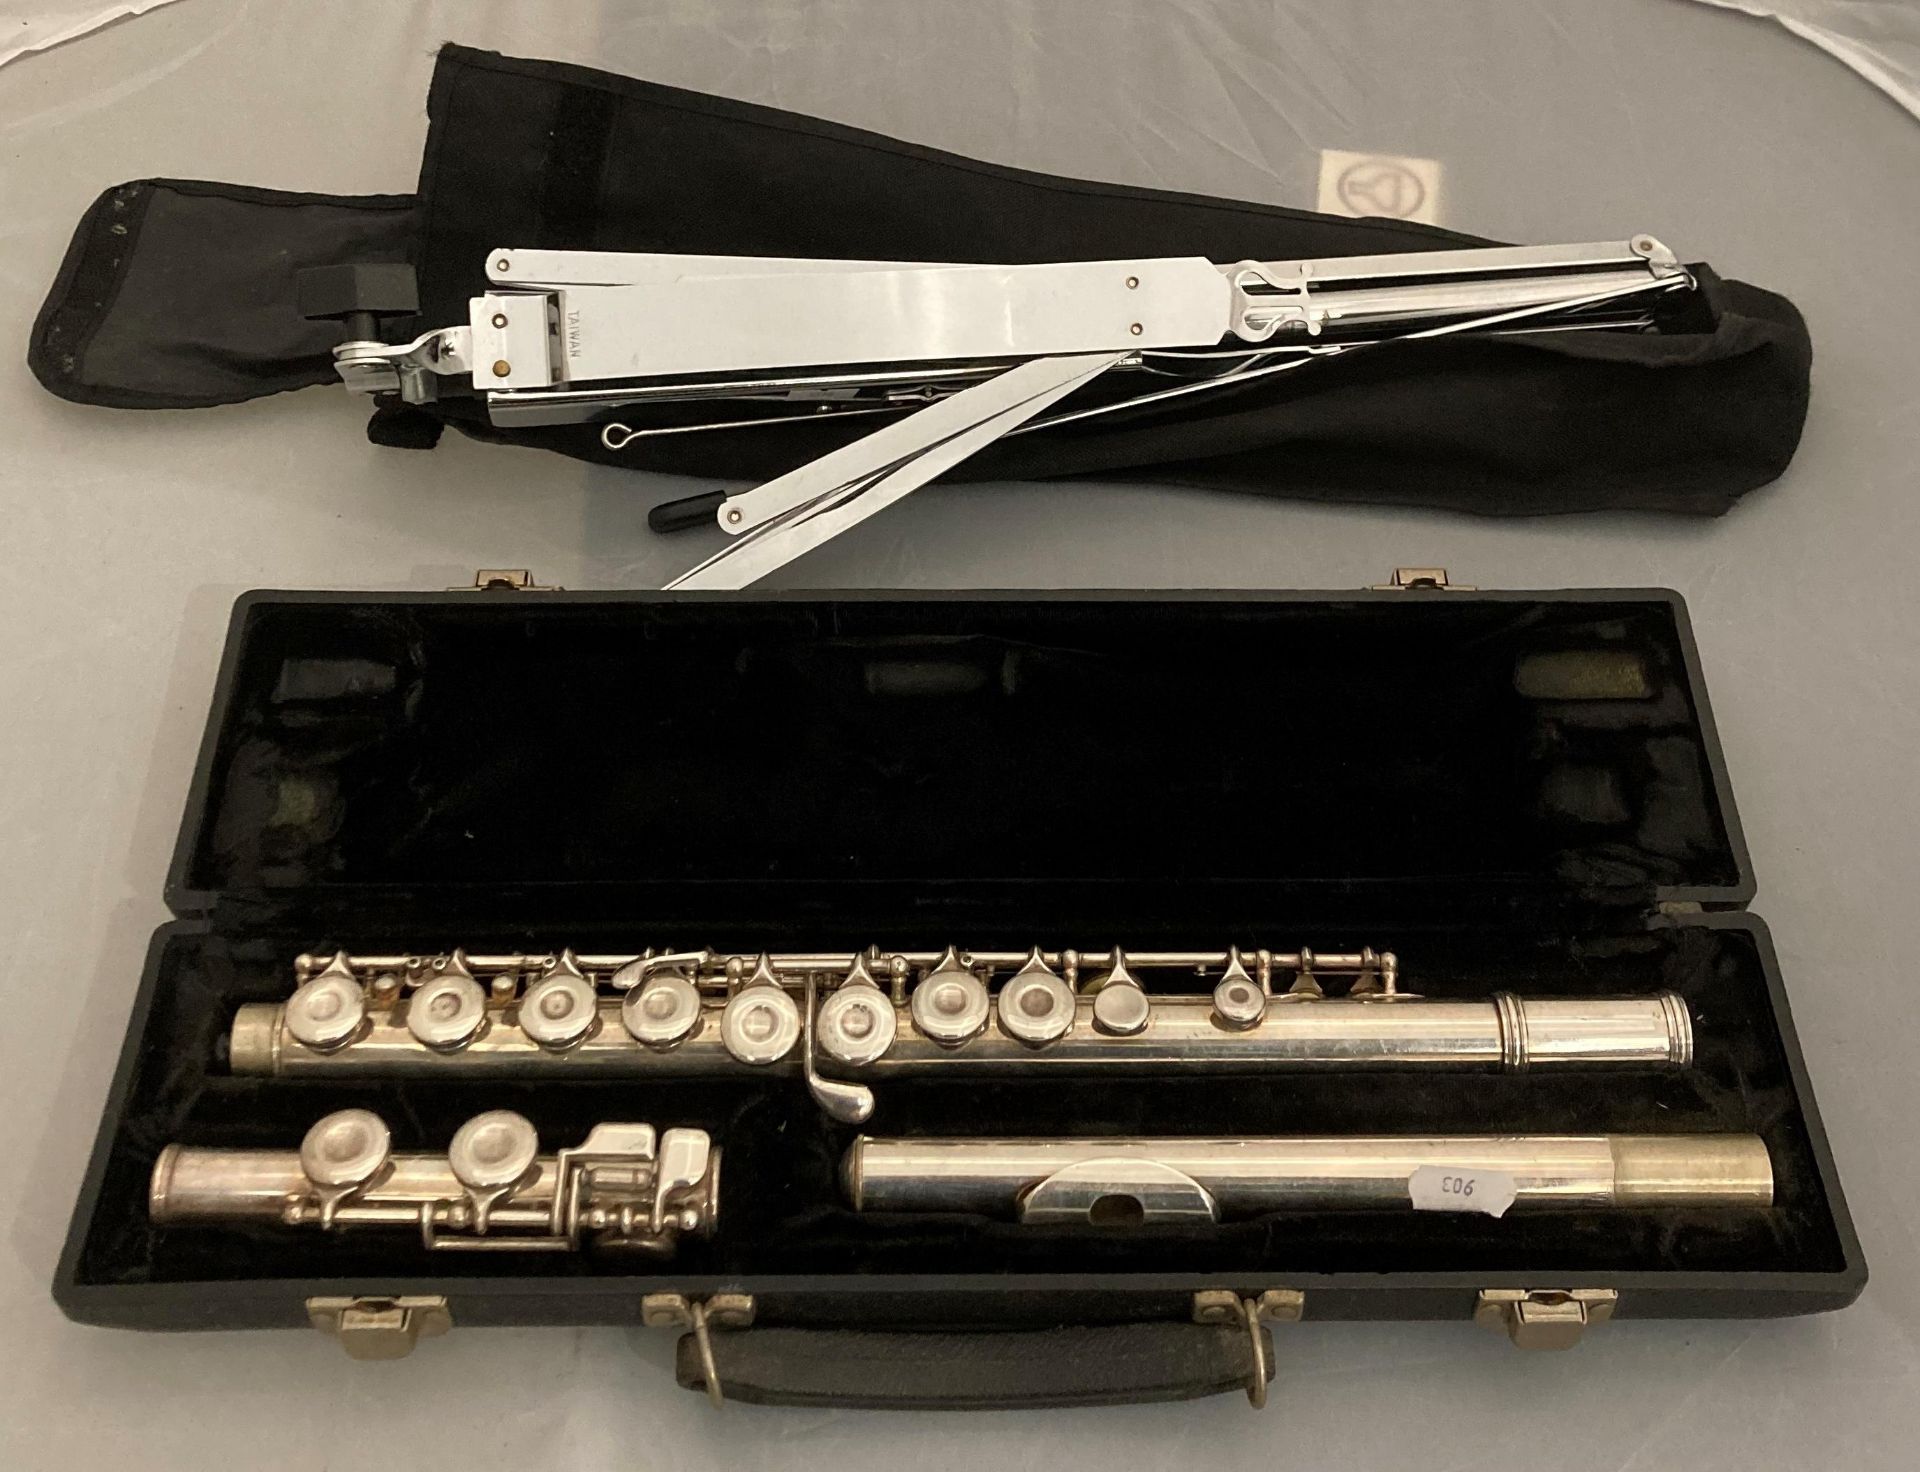 King Cleveland 610 flute in hard black case and a collapsible sheet music stand in black fabric